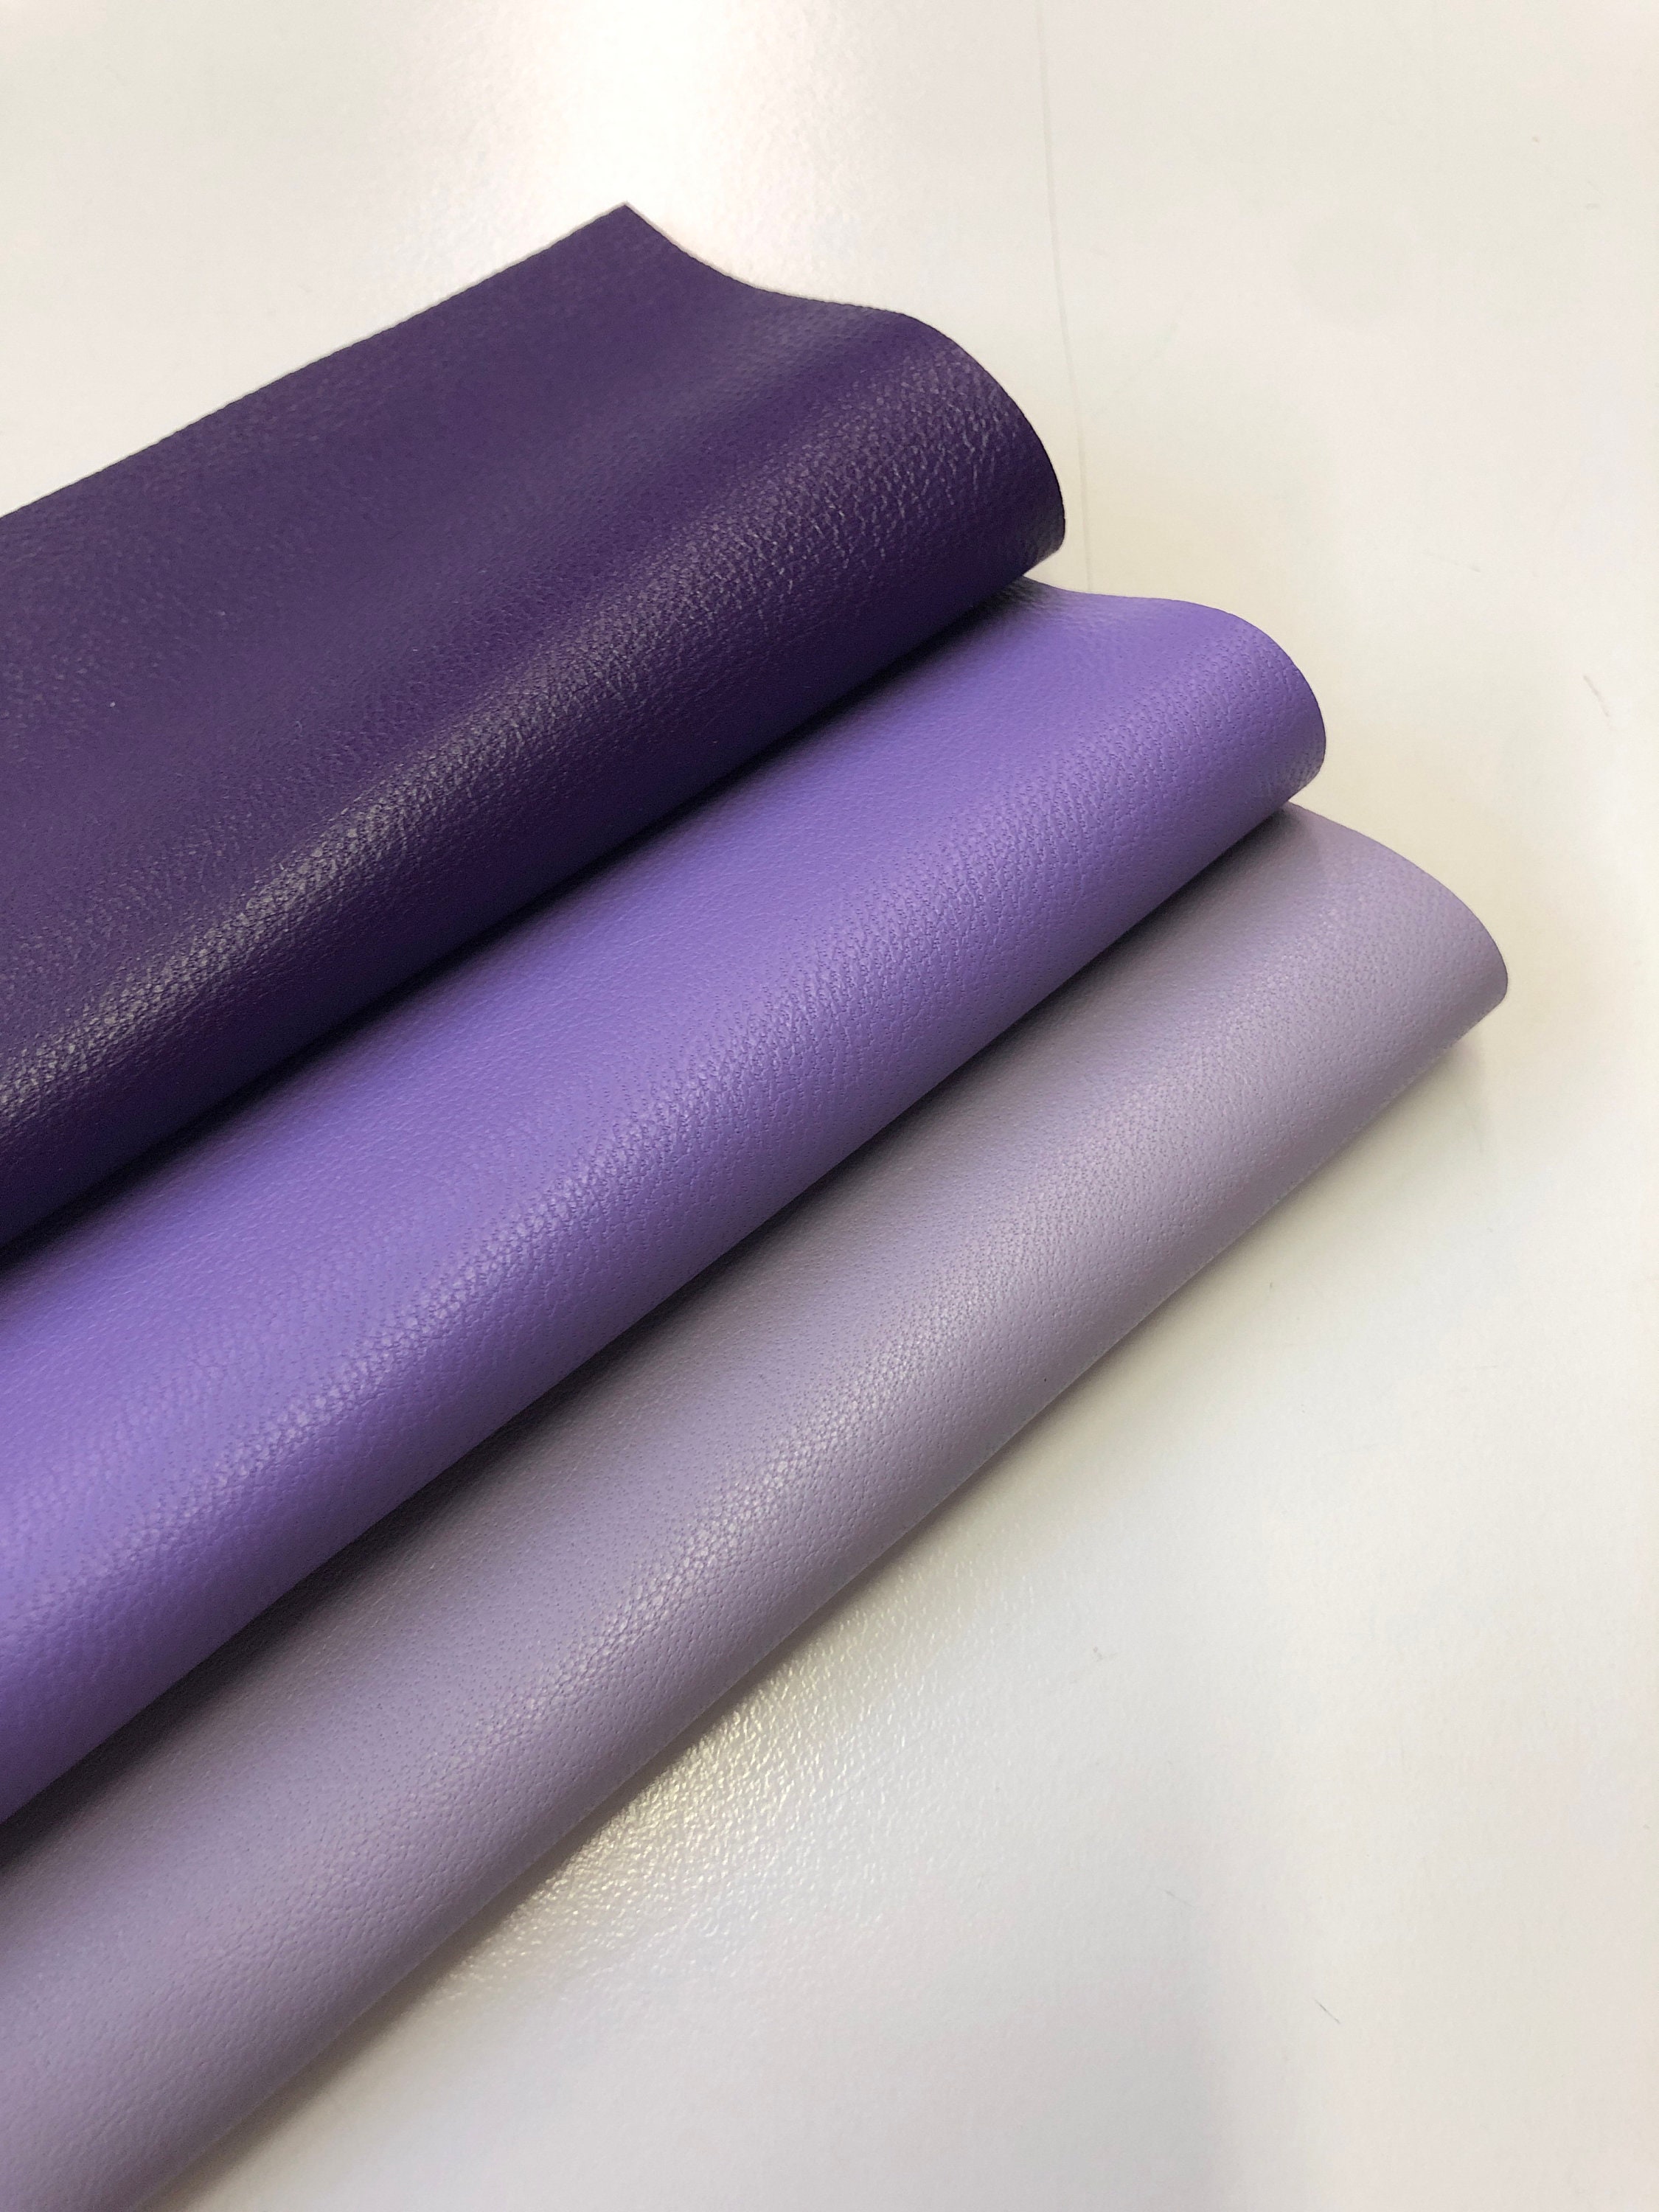 Purple LEATHER, Leather Sheet, Leather Skins/variety Leather Colors/lambskin  Leather/thickness 0.6-0.7mm /CC325 